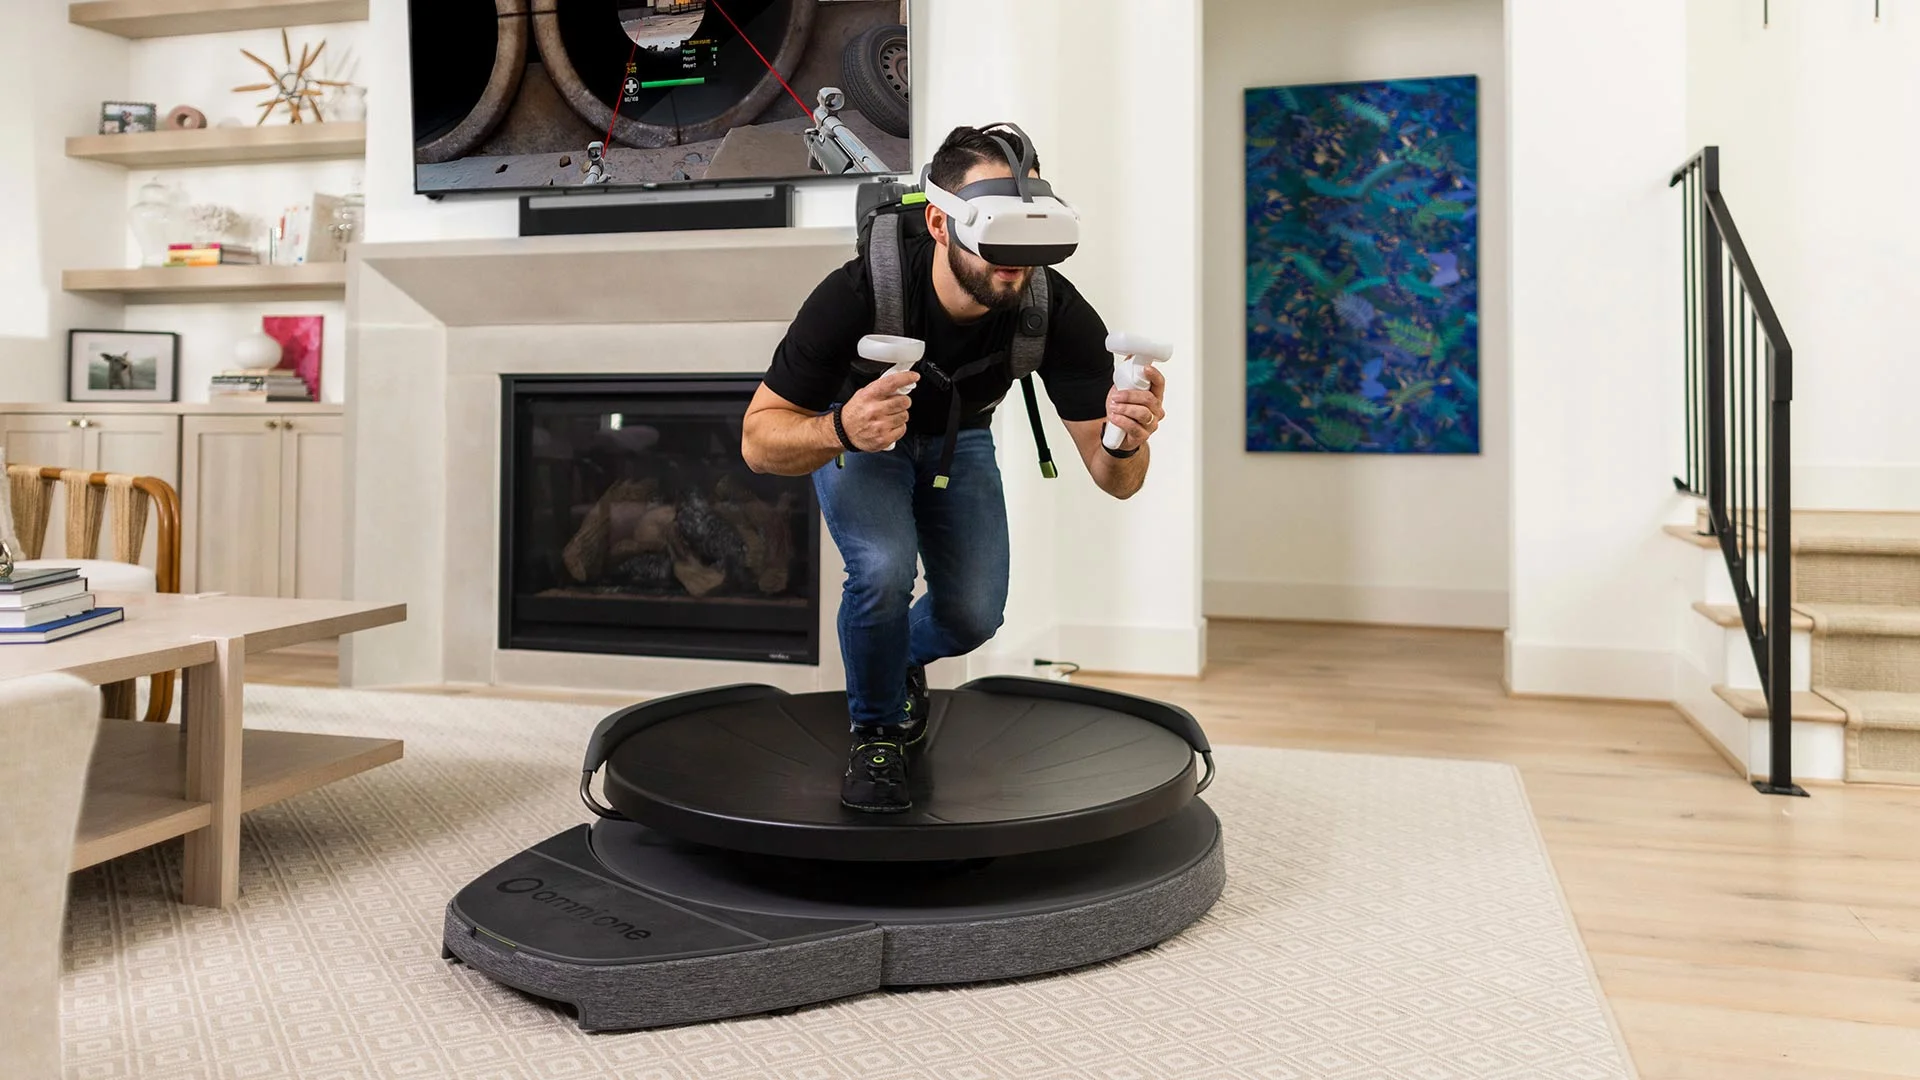 Man using virtual reality headset and motion controllers on a VR omnidirectional treadmill at home